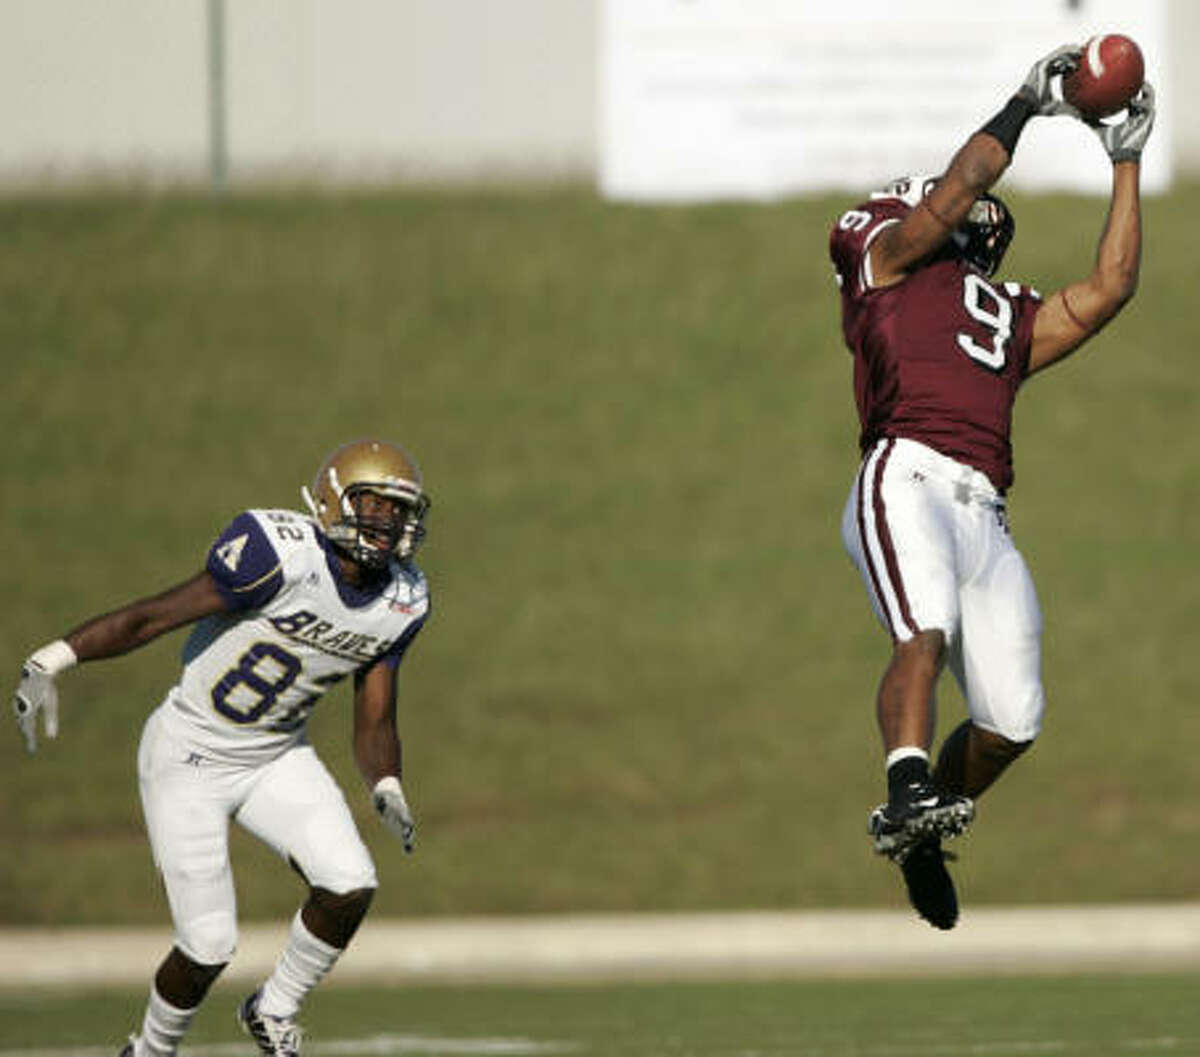 Texas Southern's Curtis Thomas intercepts a pass intended for Alcorn State's Edward Johnson in the third quarter of Saturday afternoon's game at Delmar Stadium.